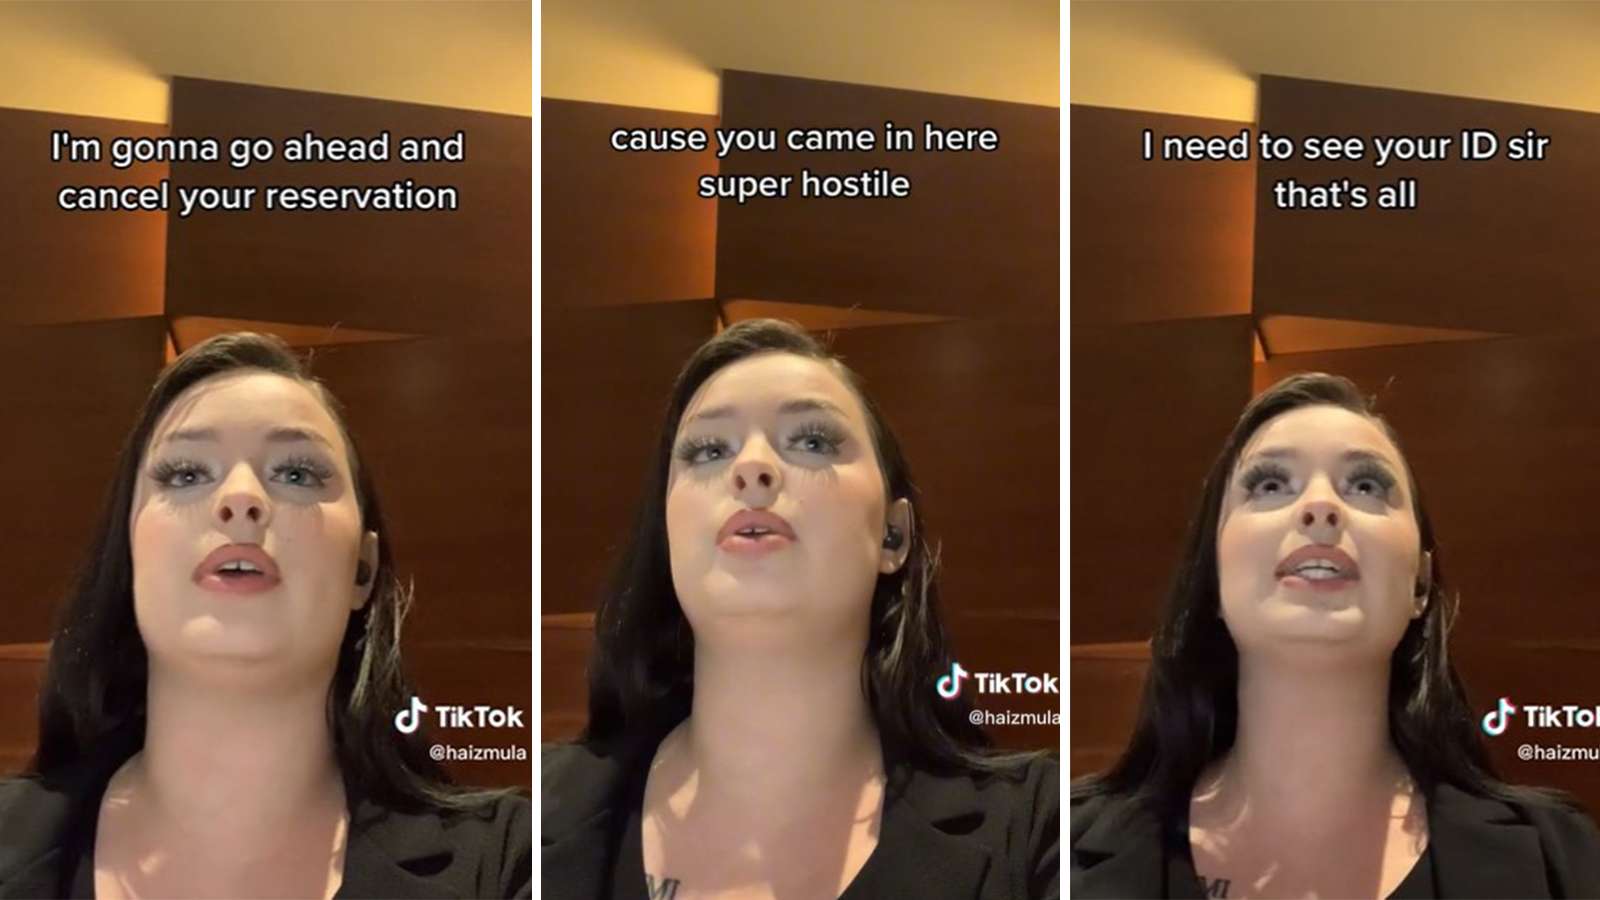 hotel worker goes viral after rude customer threatens her